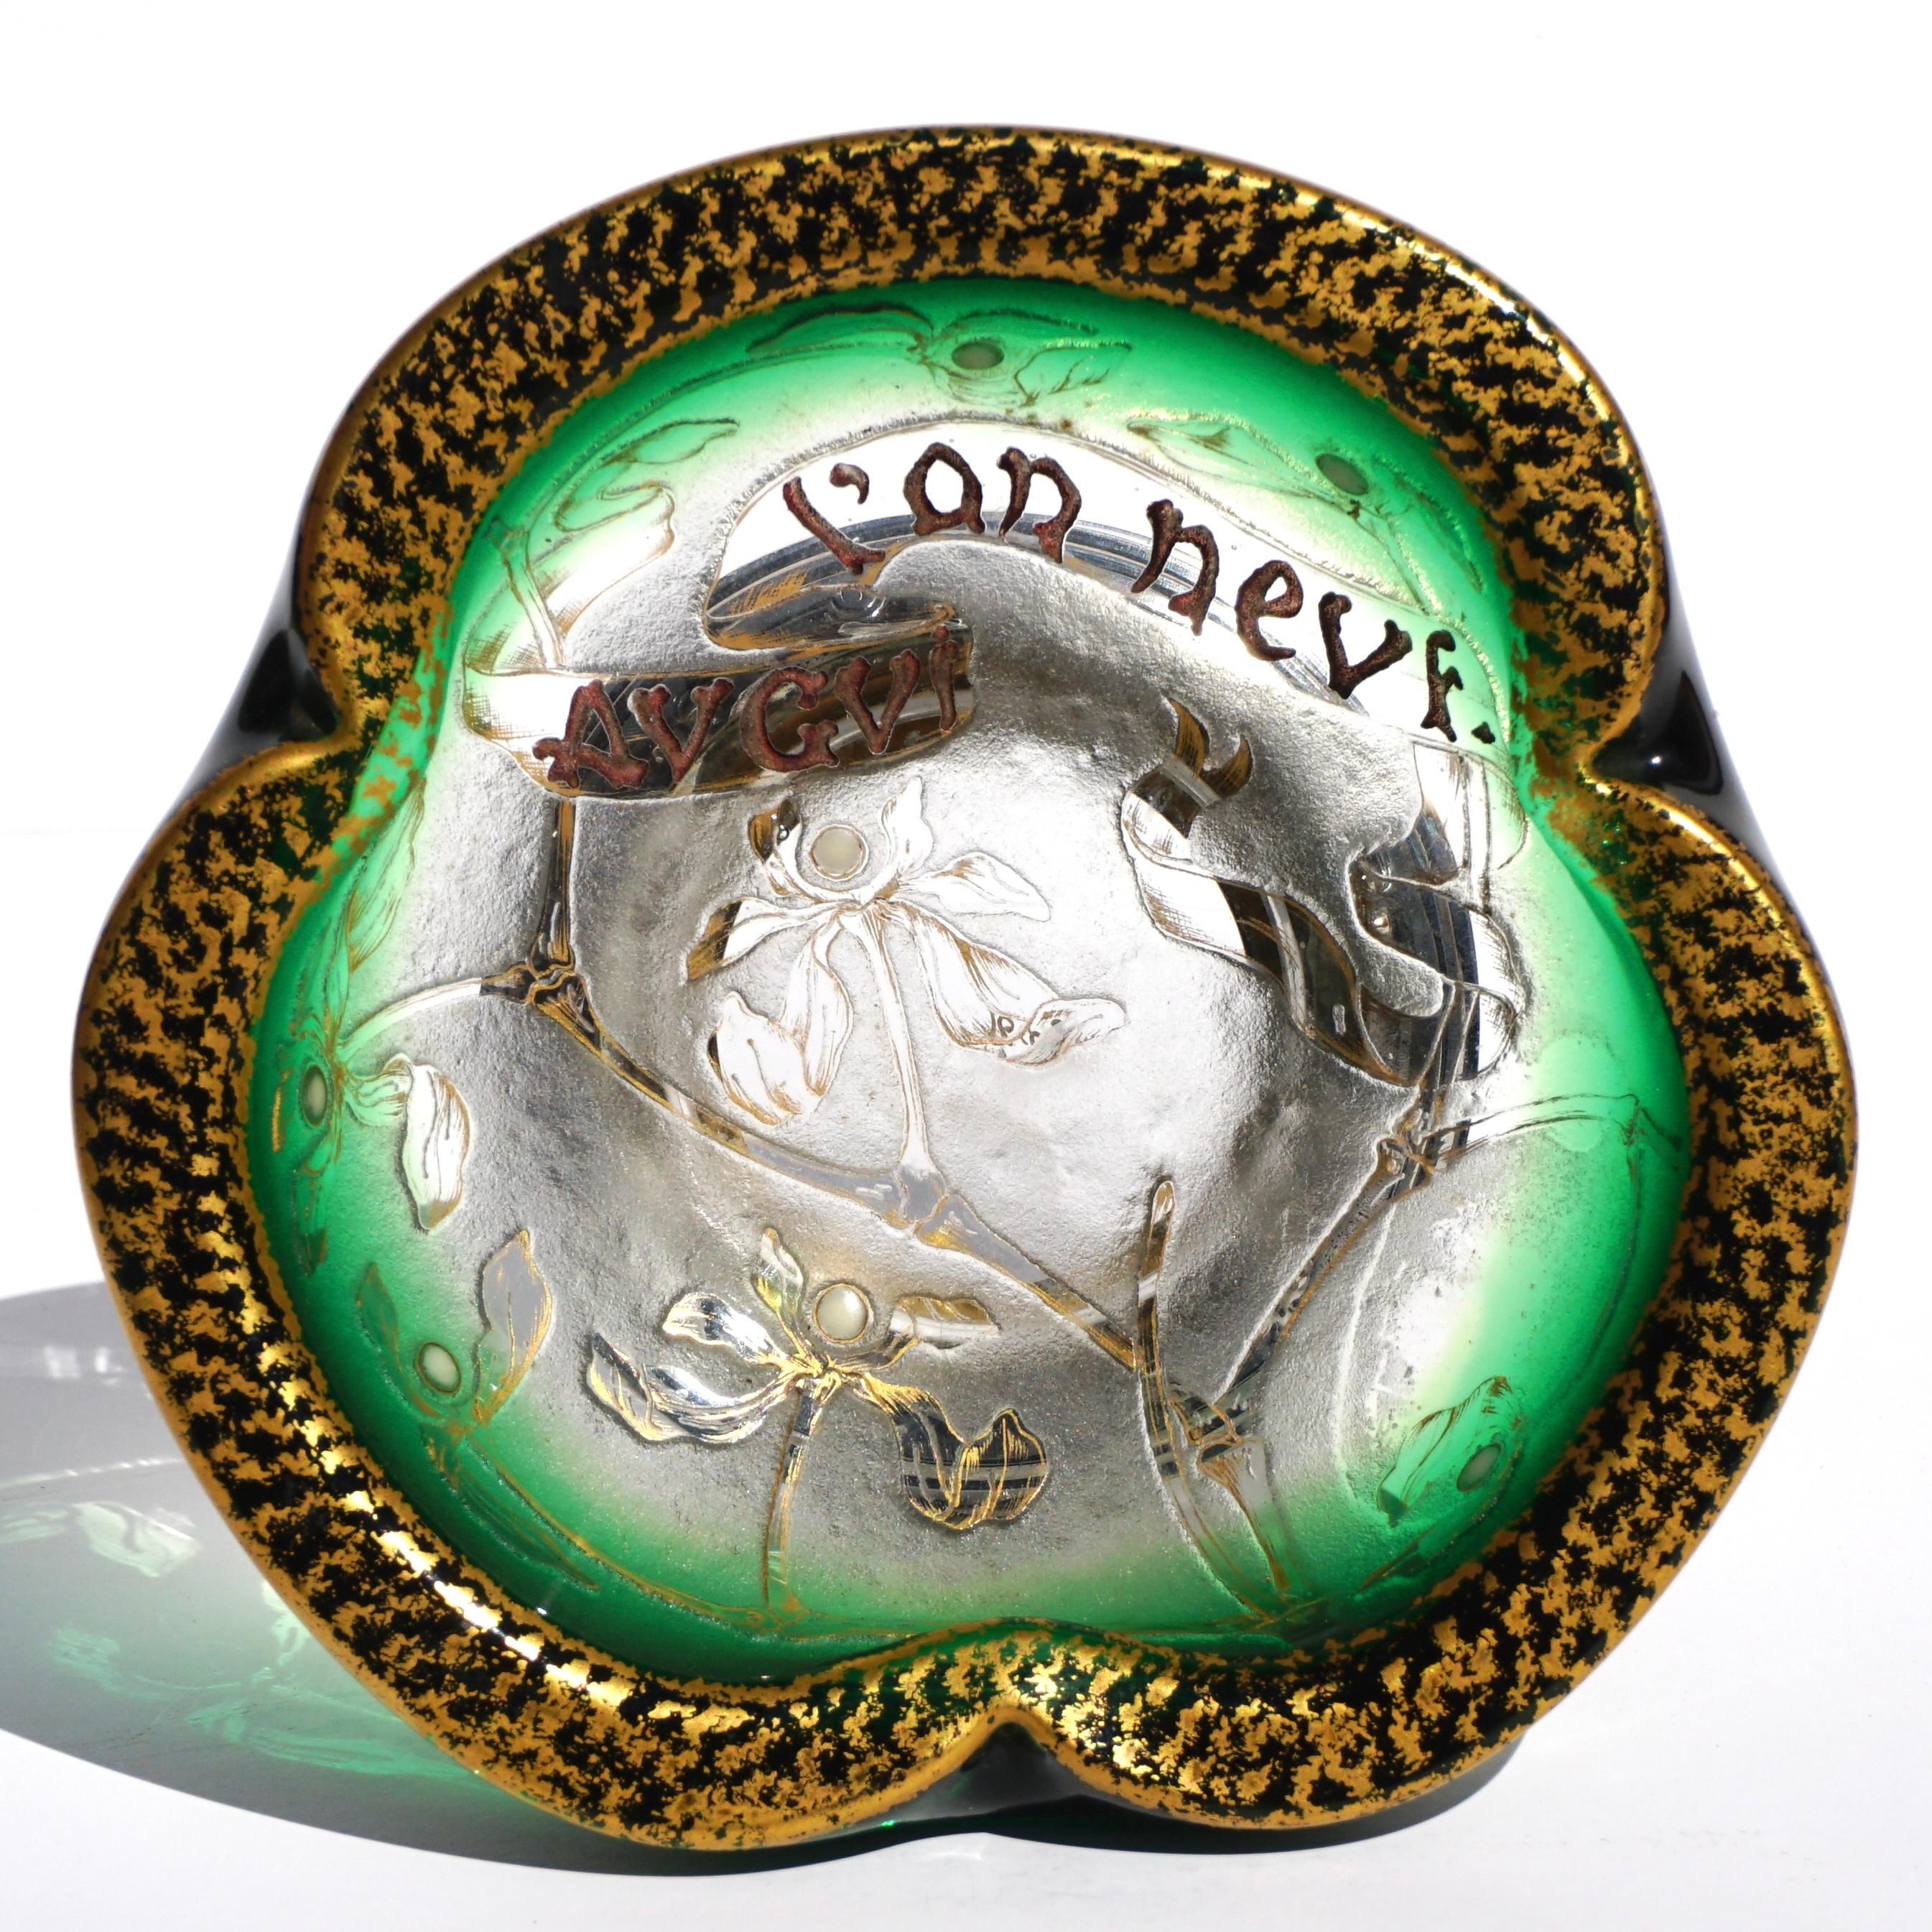 Fine Daum Partial Gilt, Enameled and Acid-Etched Glass “Au Gui L'an Neuf” Bowl with Silver Mount, circa 1895. Art Nouveau Vase Parlant.

Marks: Daum, (Cross of Lorraine), Nancy

Height: 3.5  inches (8.9 cm) Diameter: 5.7 Inches

Thick colorless